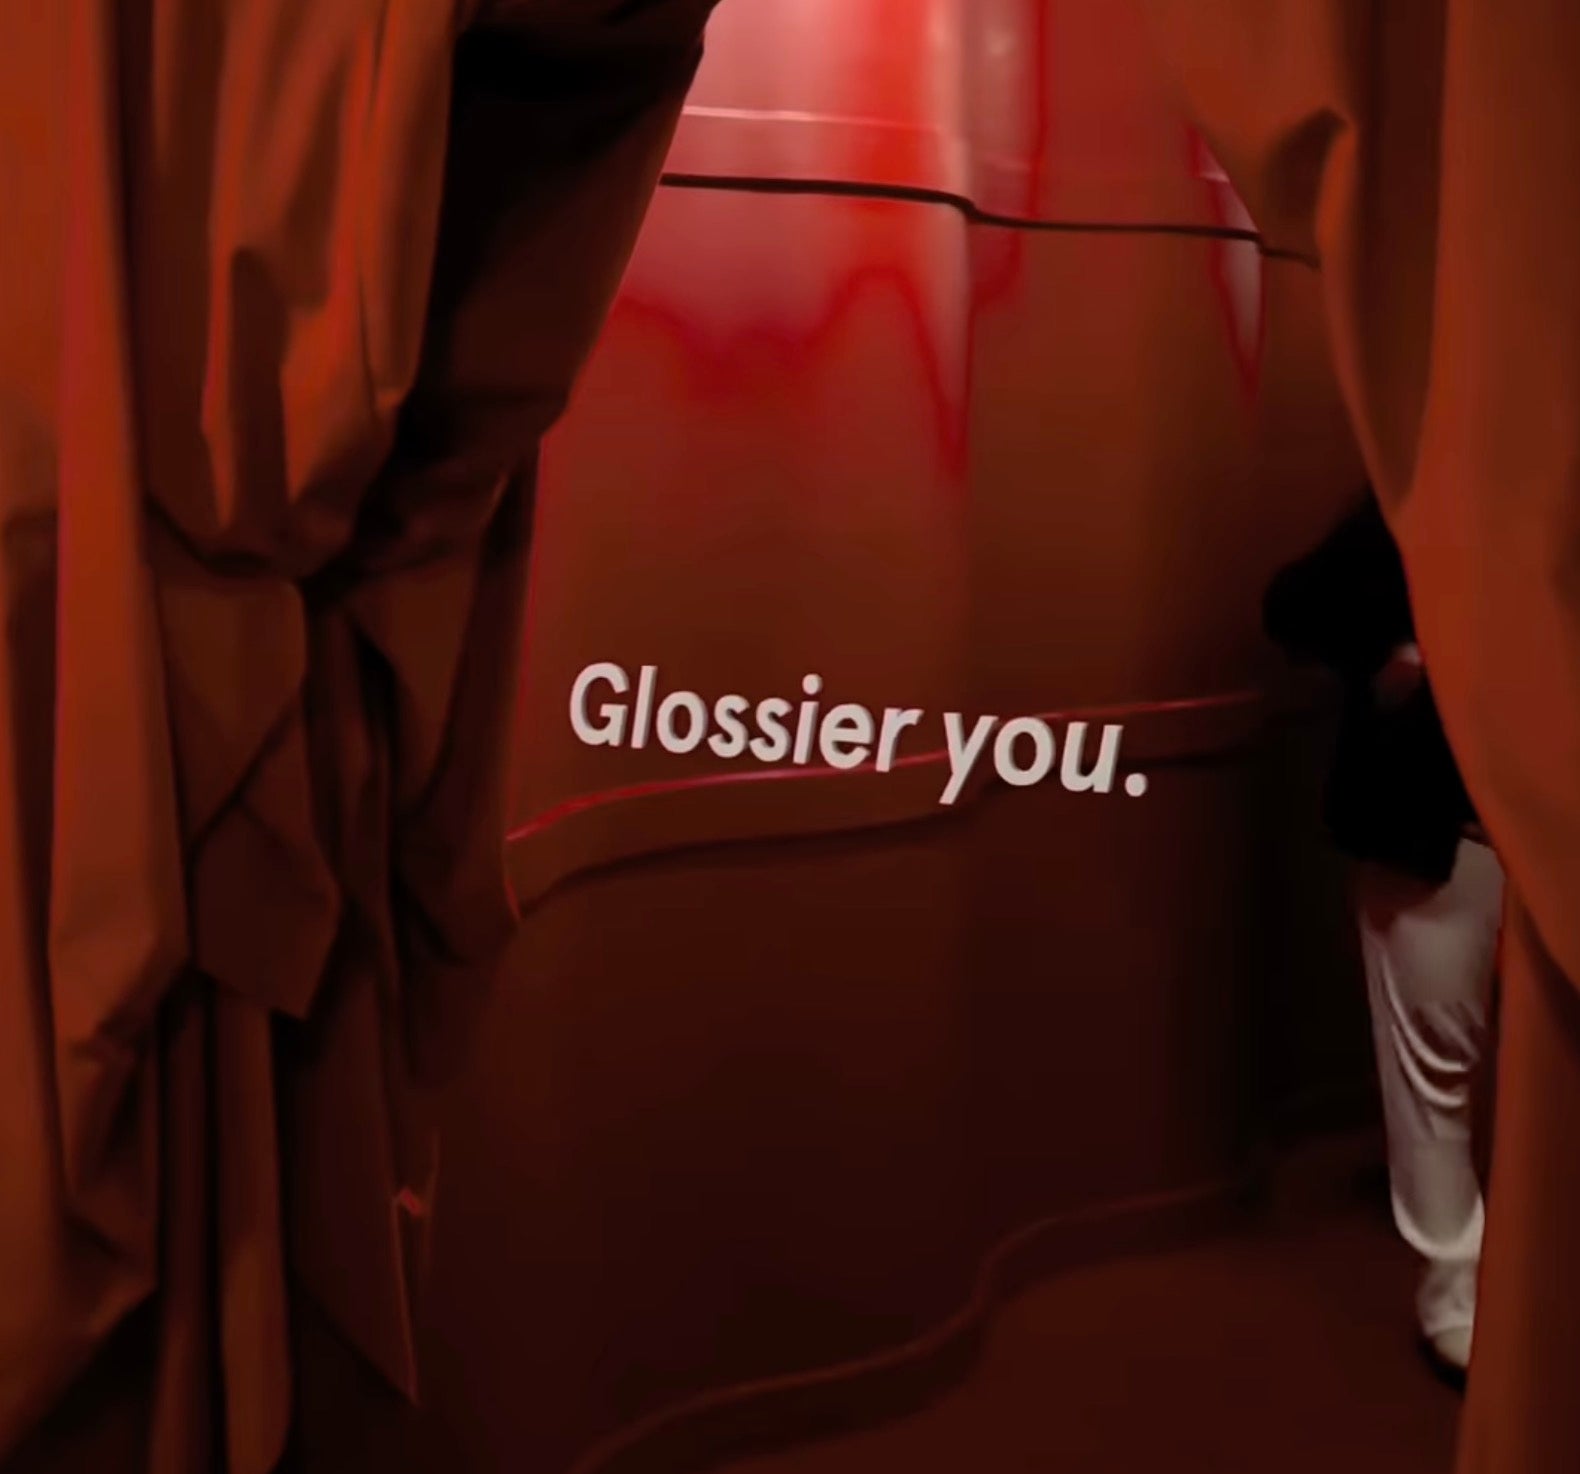 Inside The Glossier Pop-up